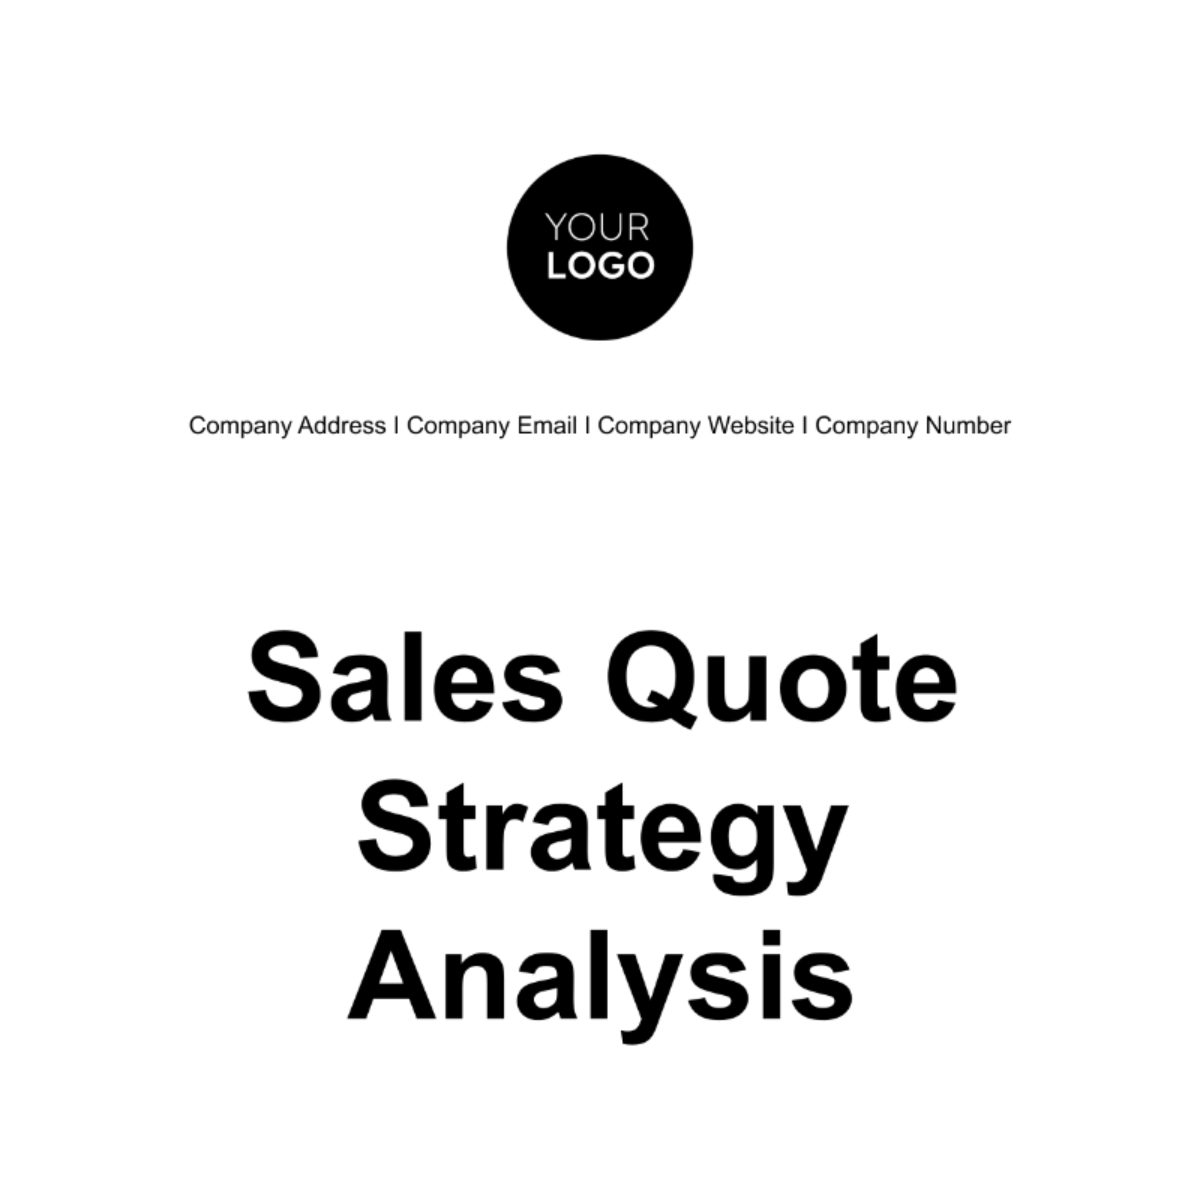 Sales Quote Strategy Analysis Template